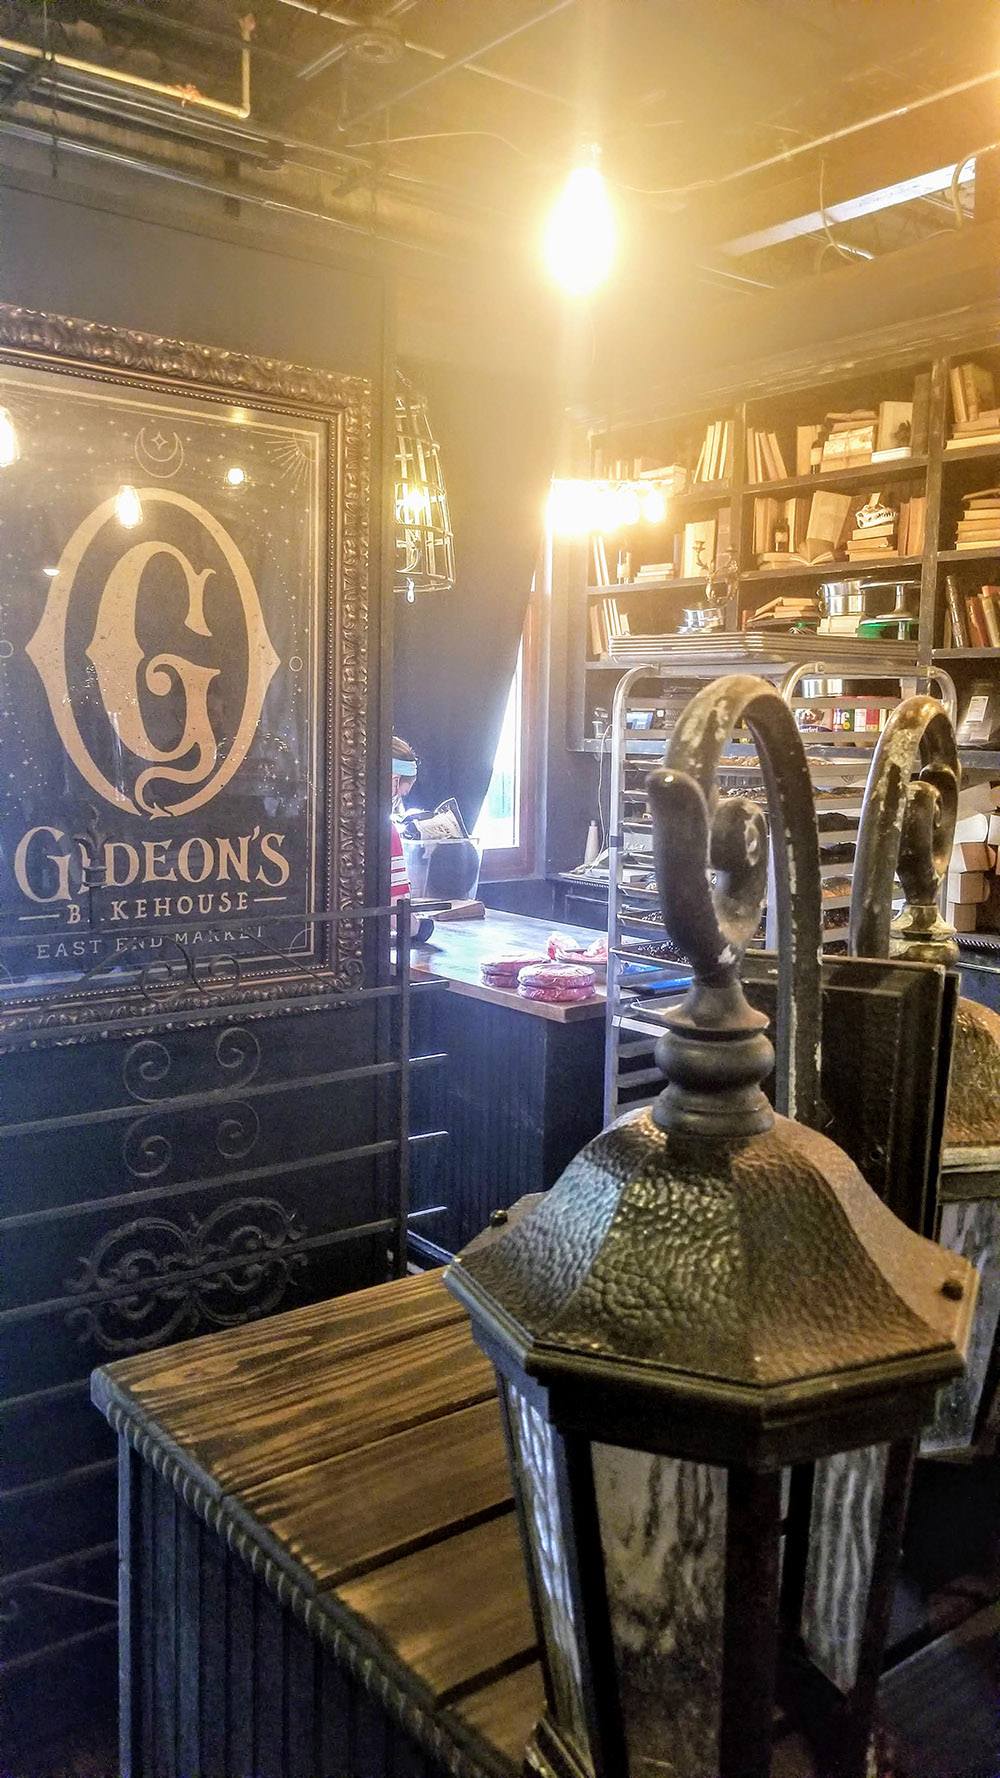 12 Surprising Facts About Gideon's Bakehouse